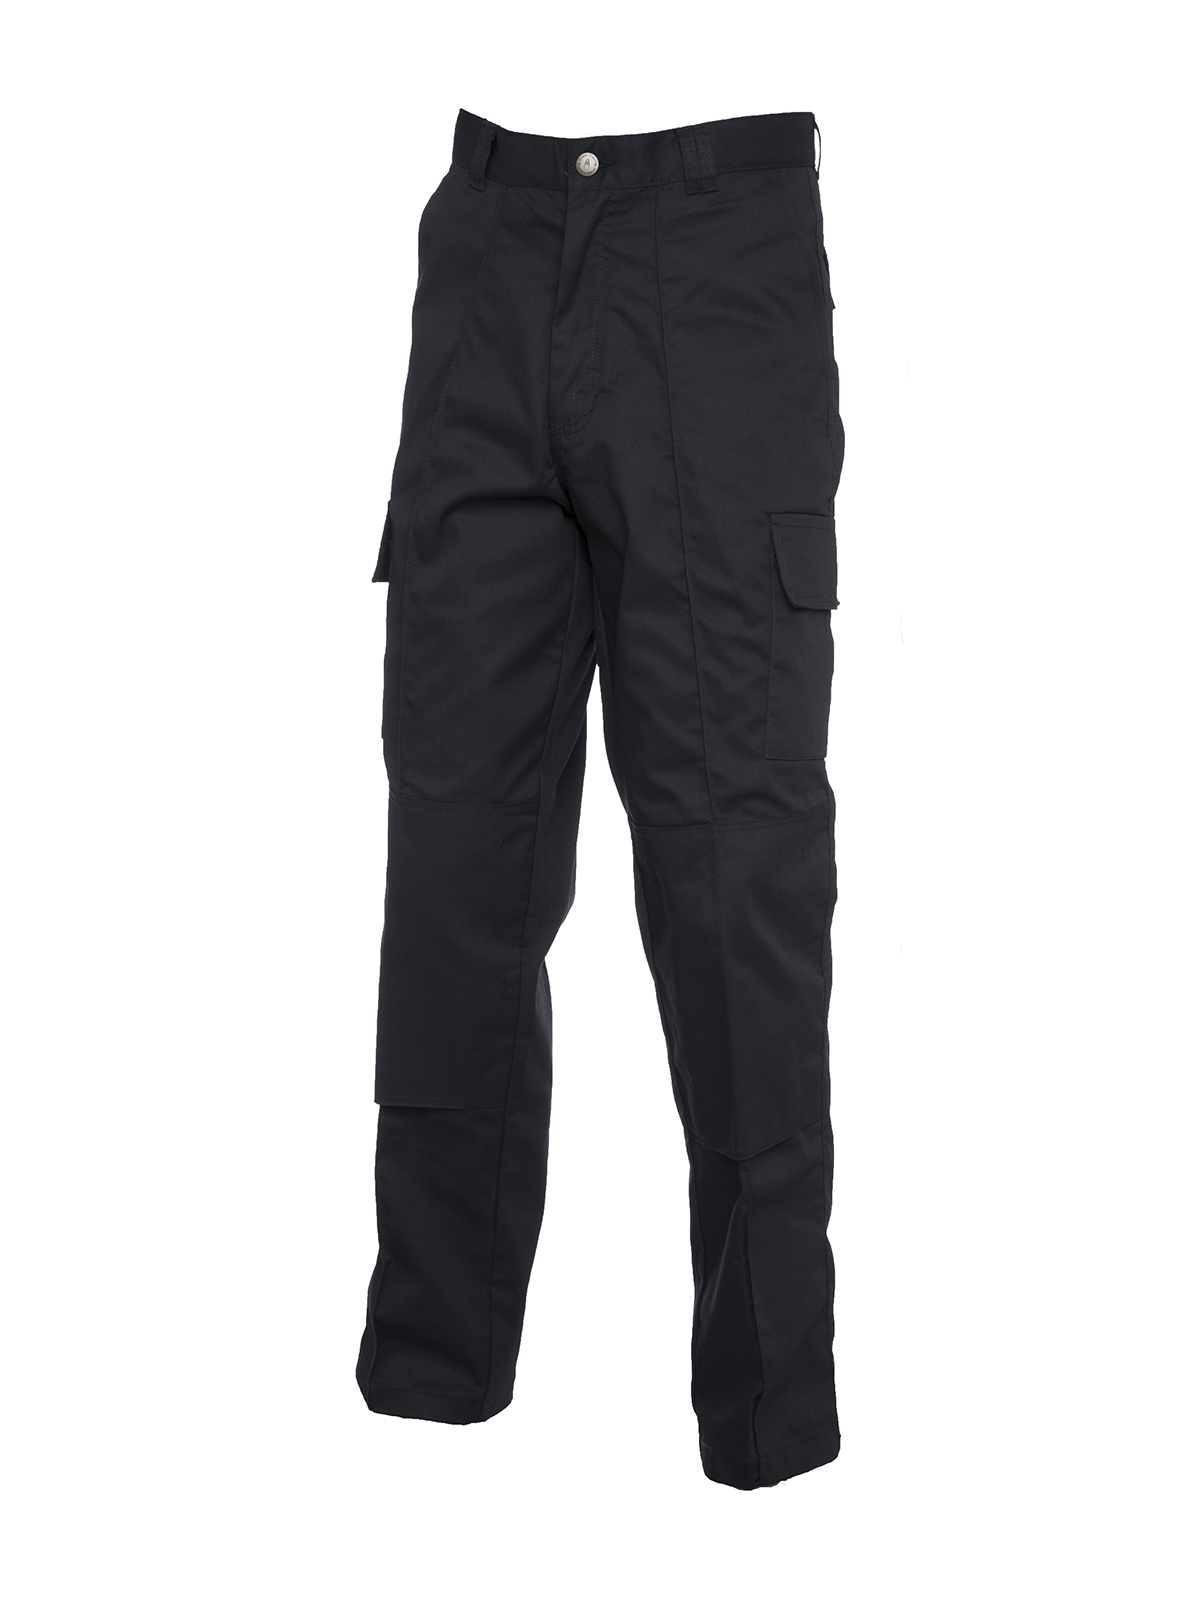 Cargo Trouser with Knee Pad Pockets Long-Uneek Clothing